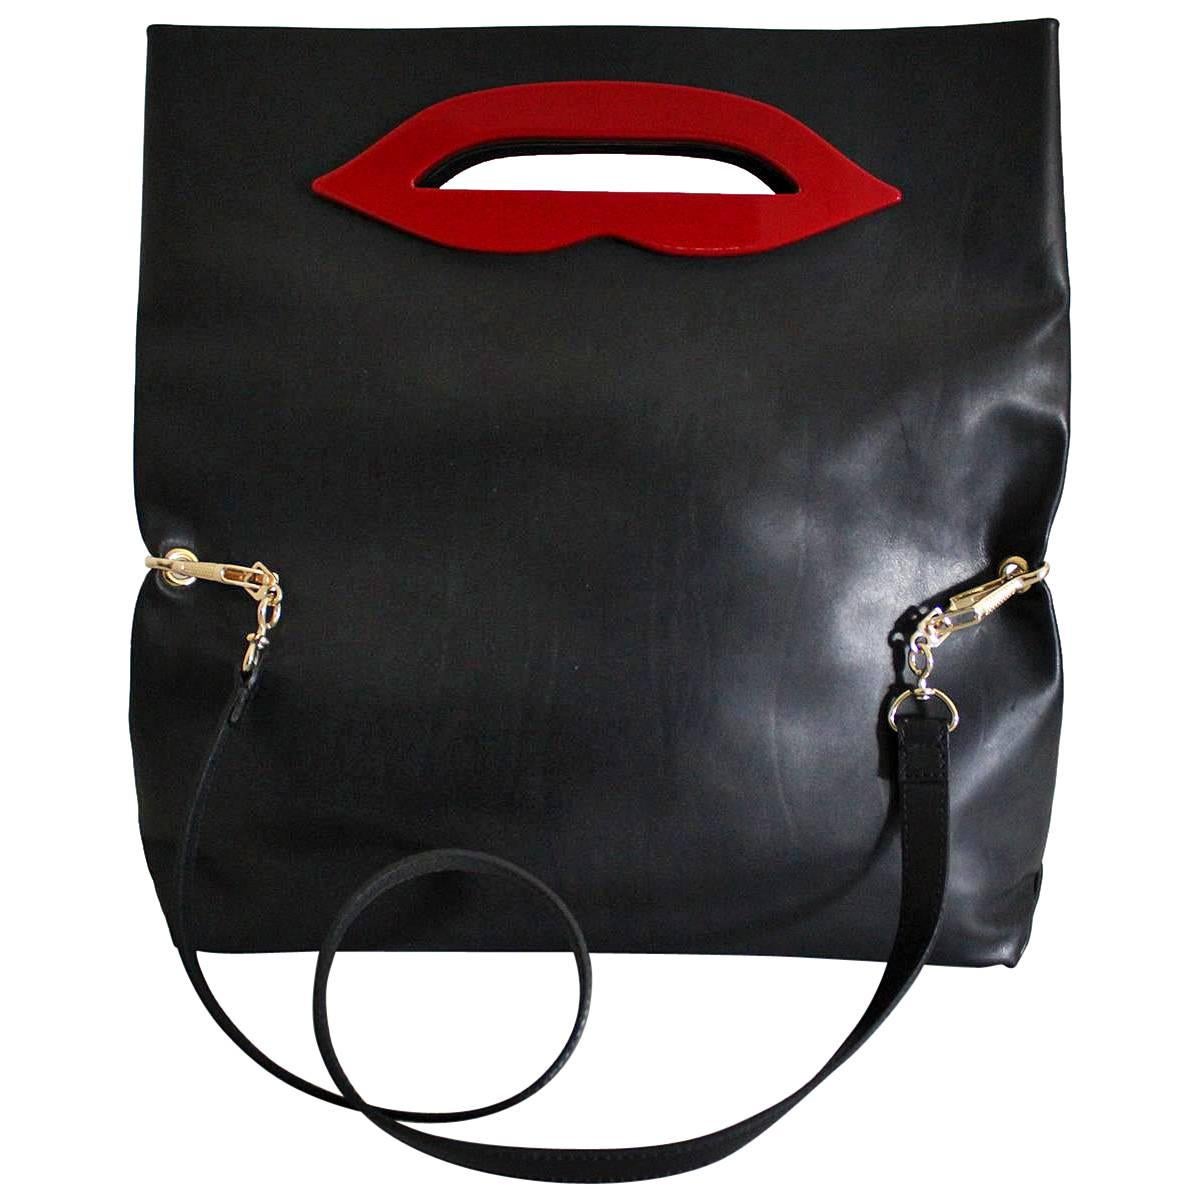 Beautifula and funny Sonia Rykiel kiss bag
Supersoft leather, nappa
Black color
Red lips
Can be carried by hand or on shoulder
Internal zip pocket
Cm 36 x 36 x 12  (14.1 x 14.1 x 4.72 inches, opened)
Worldwide express shipping included in the price !